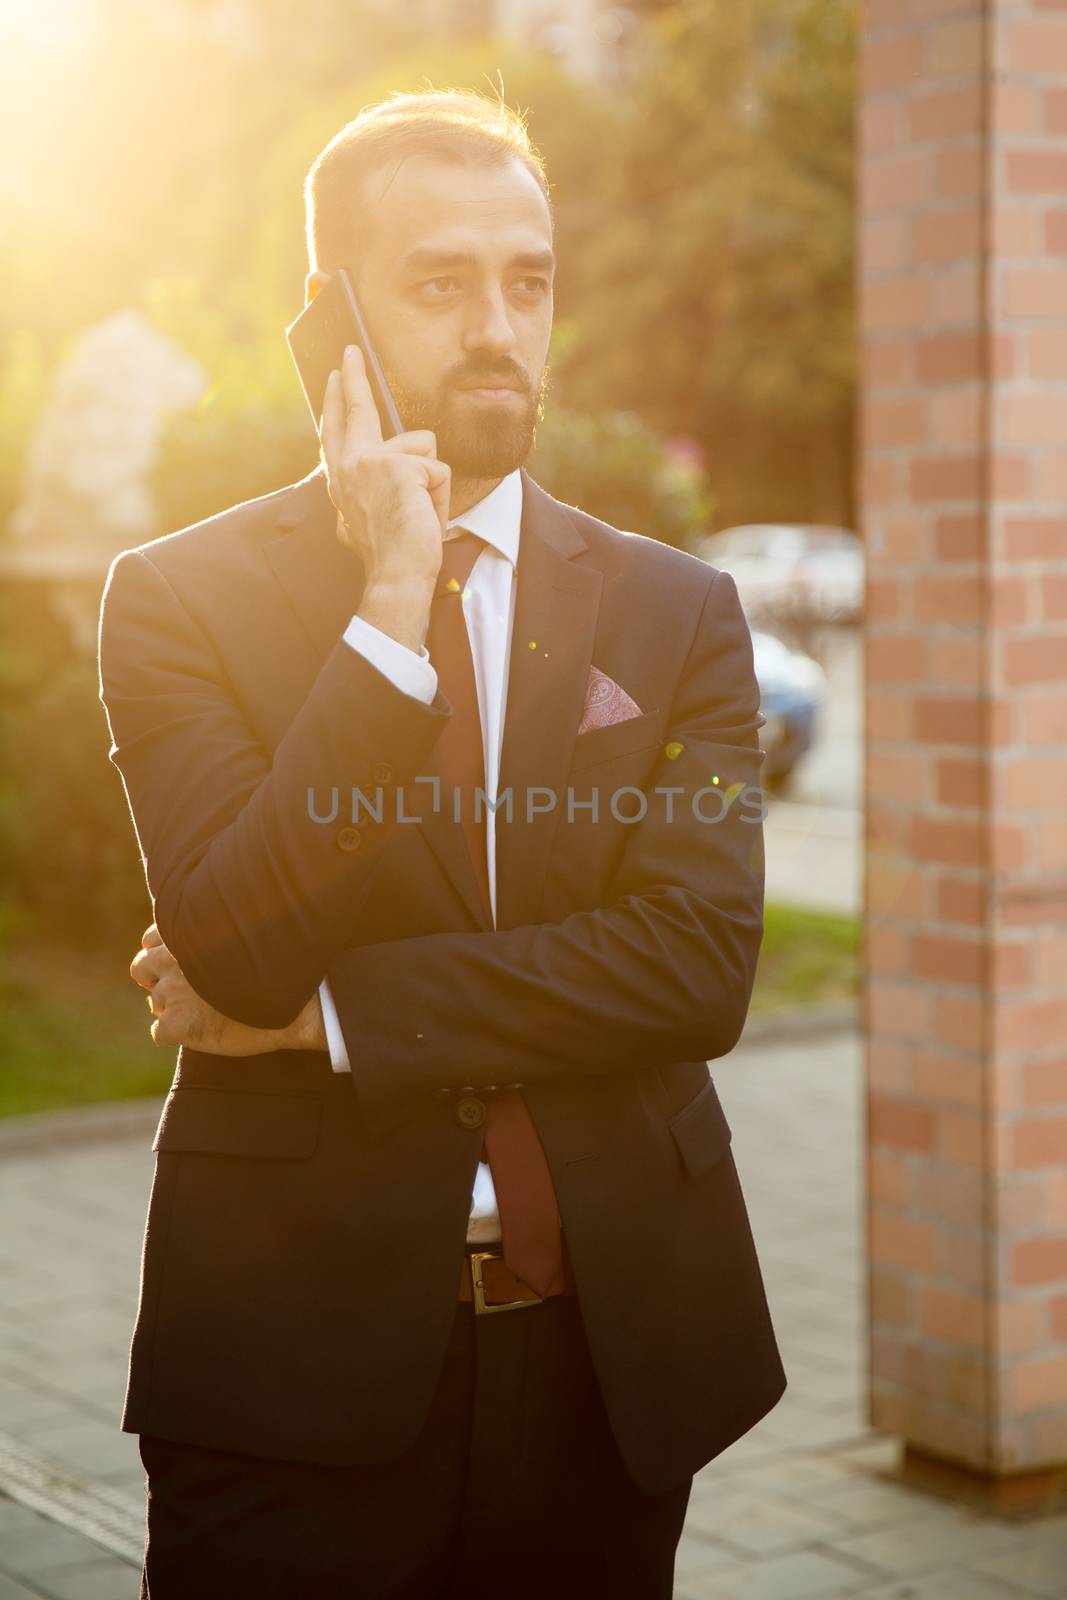 Businessman talking on the phone outside at sunset. Business on the go